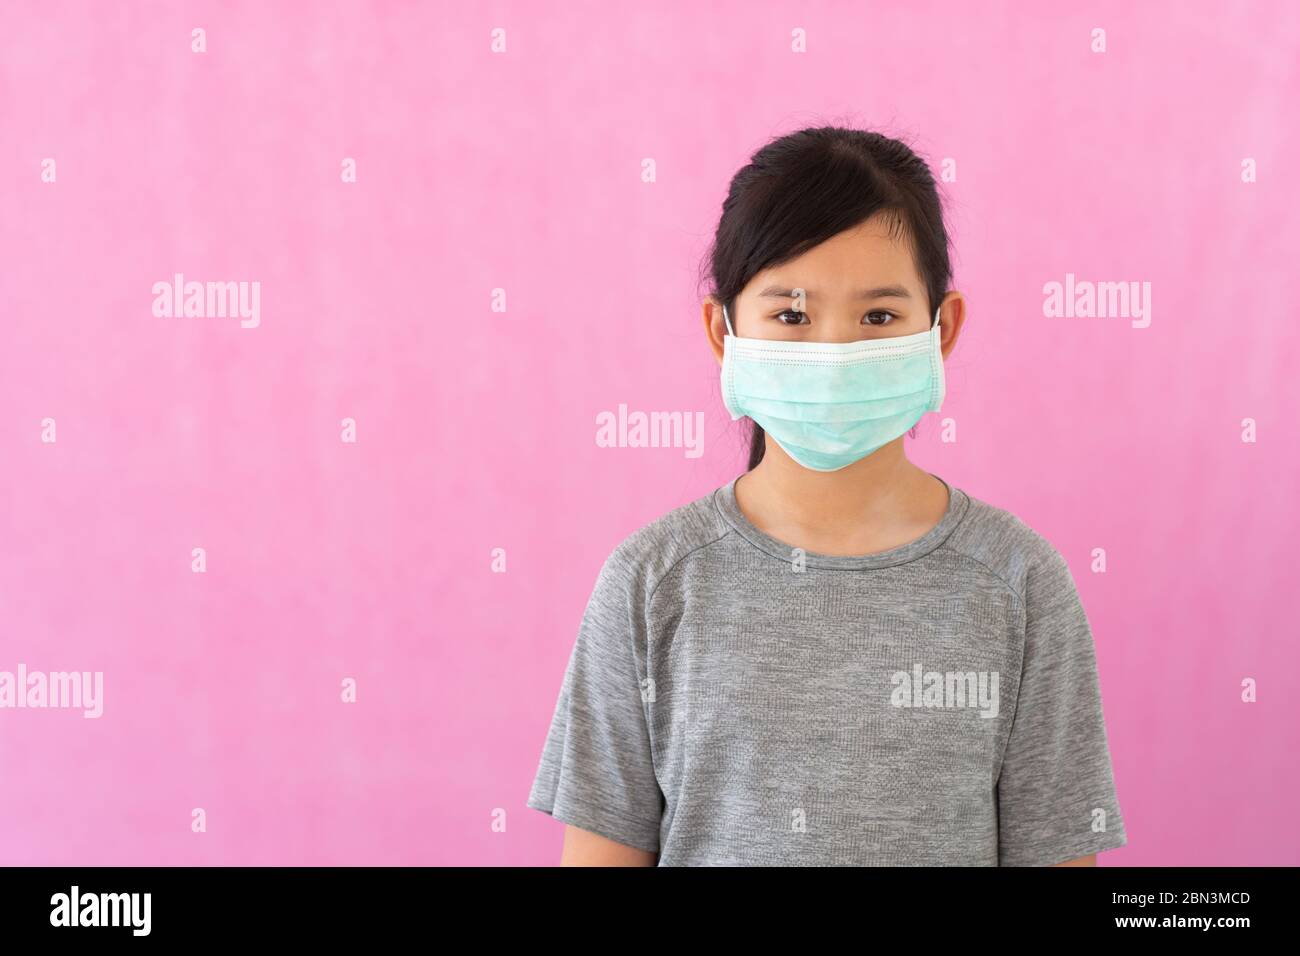 Little asian girl wearing sterile medical mask for protect Covid-19 isolated on pink background. Copy space. Stock Photo